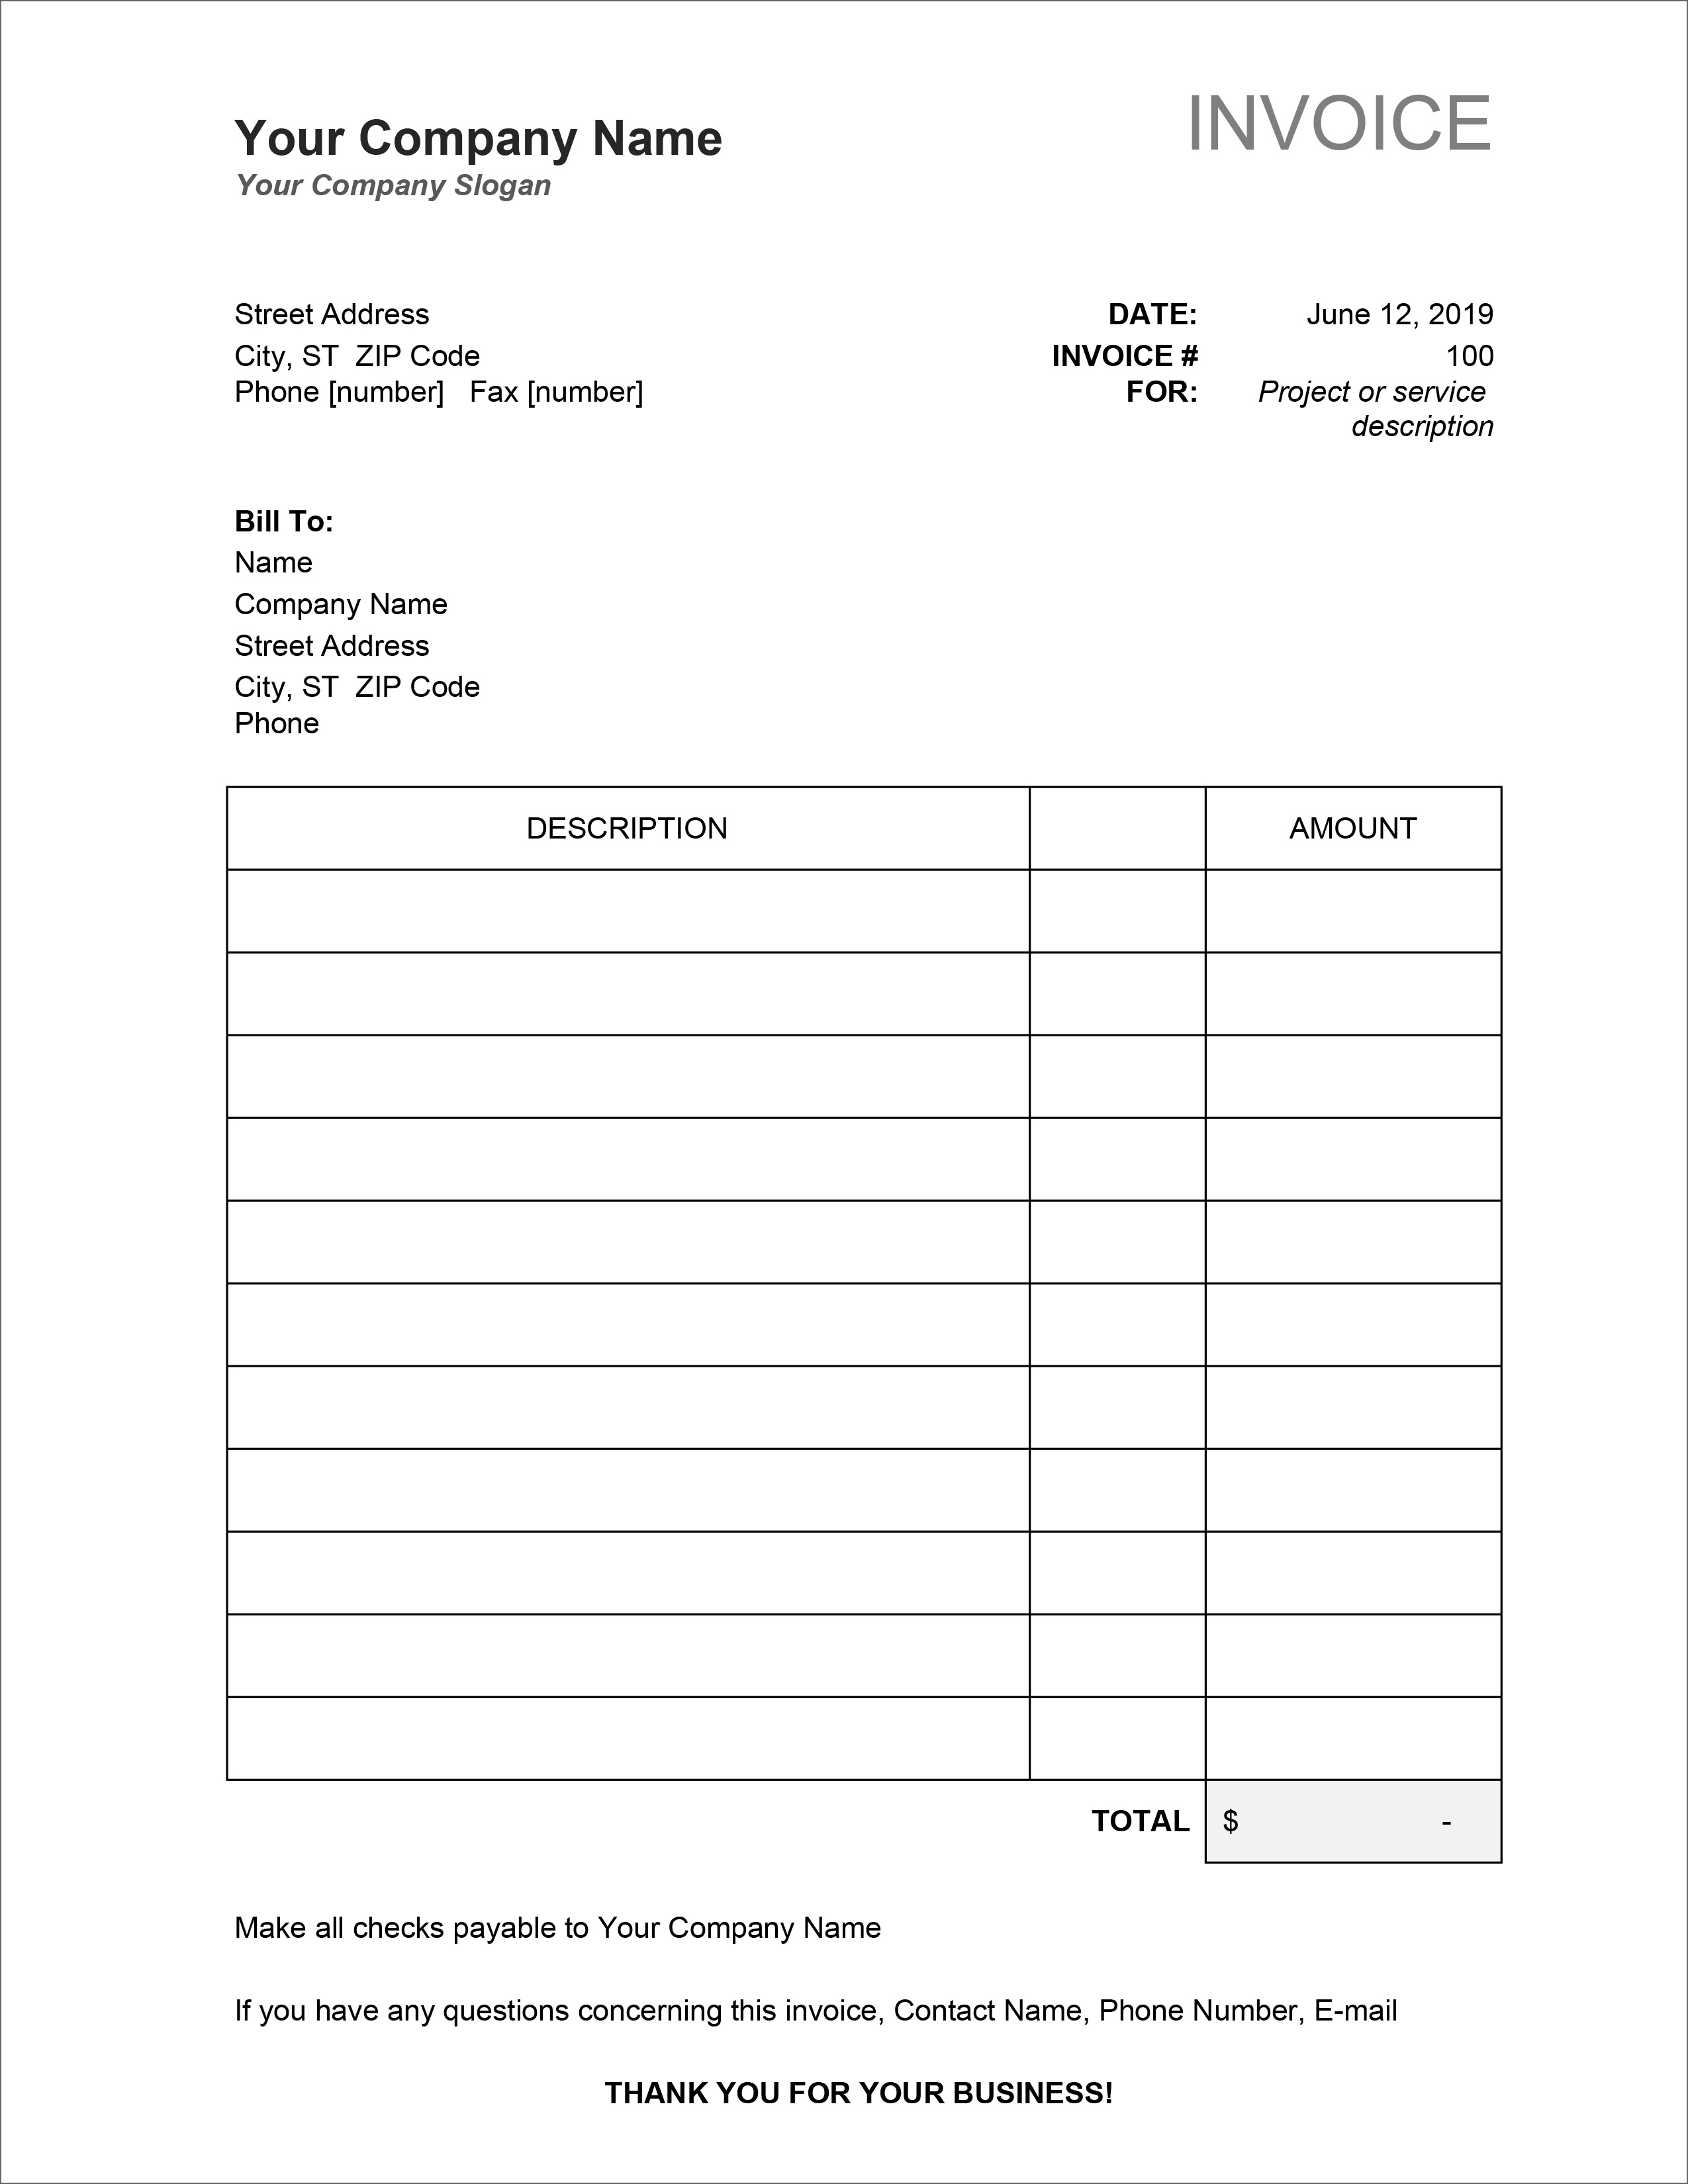 32 free invoice templates in microsoft excel and docx formats free excel invoices templates download